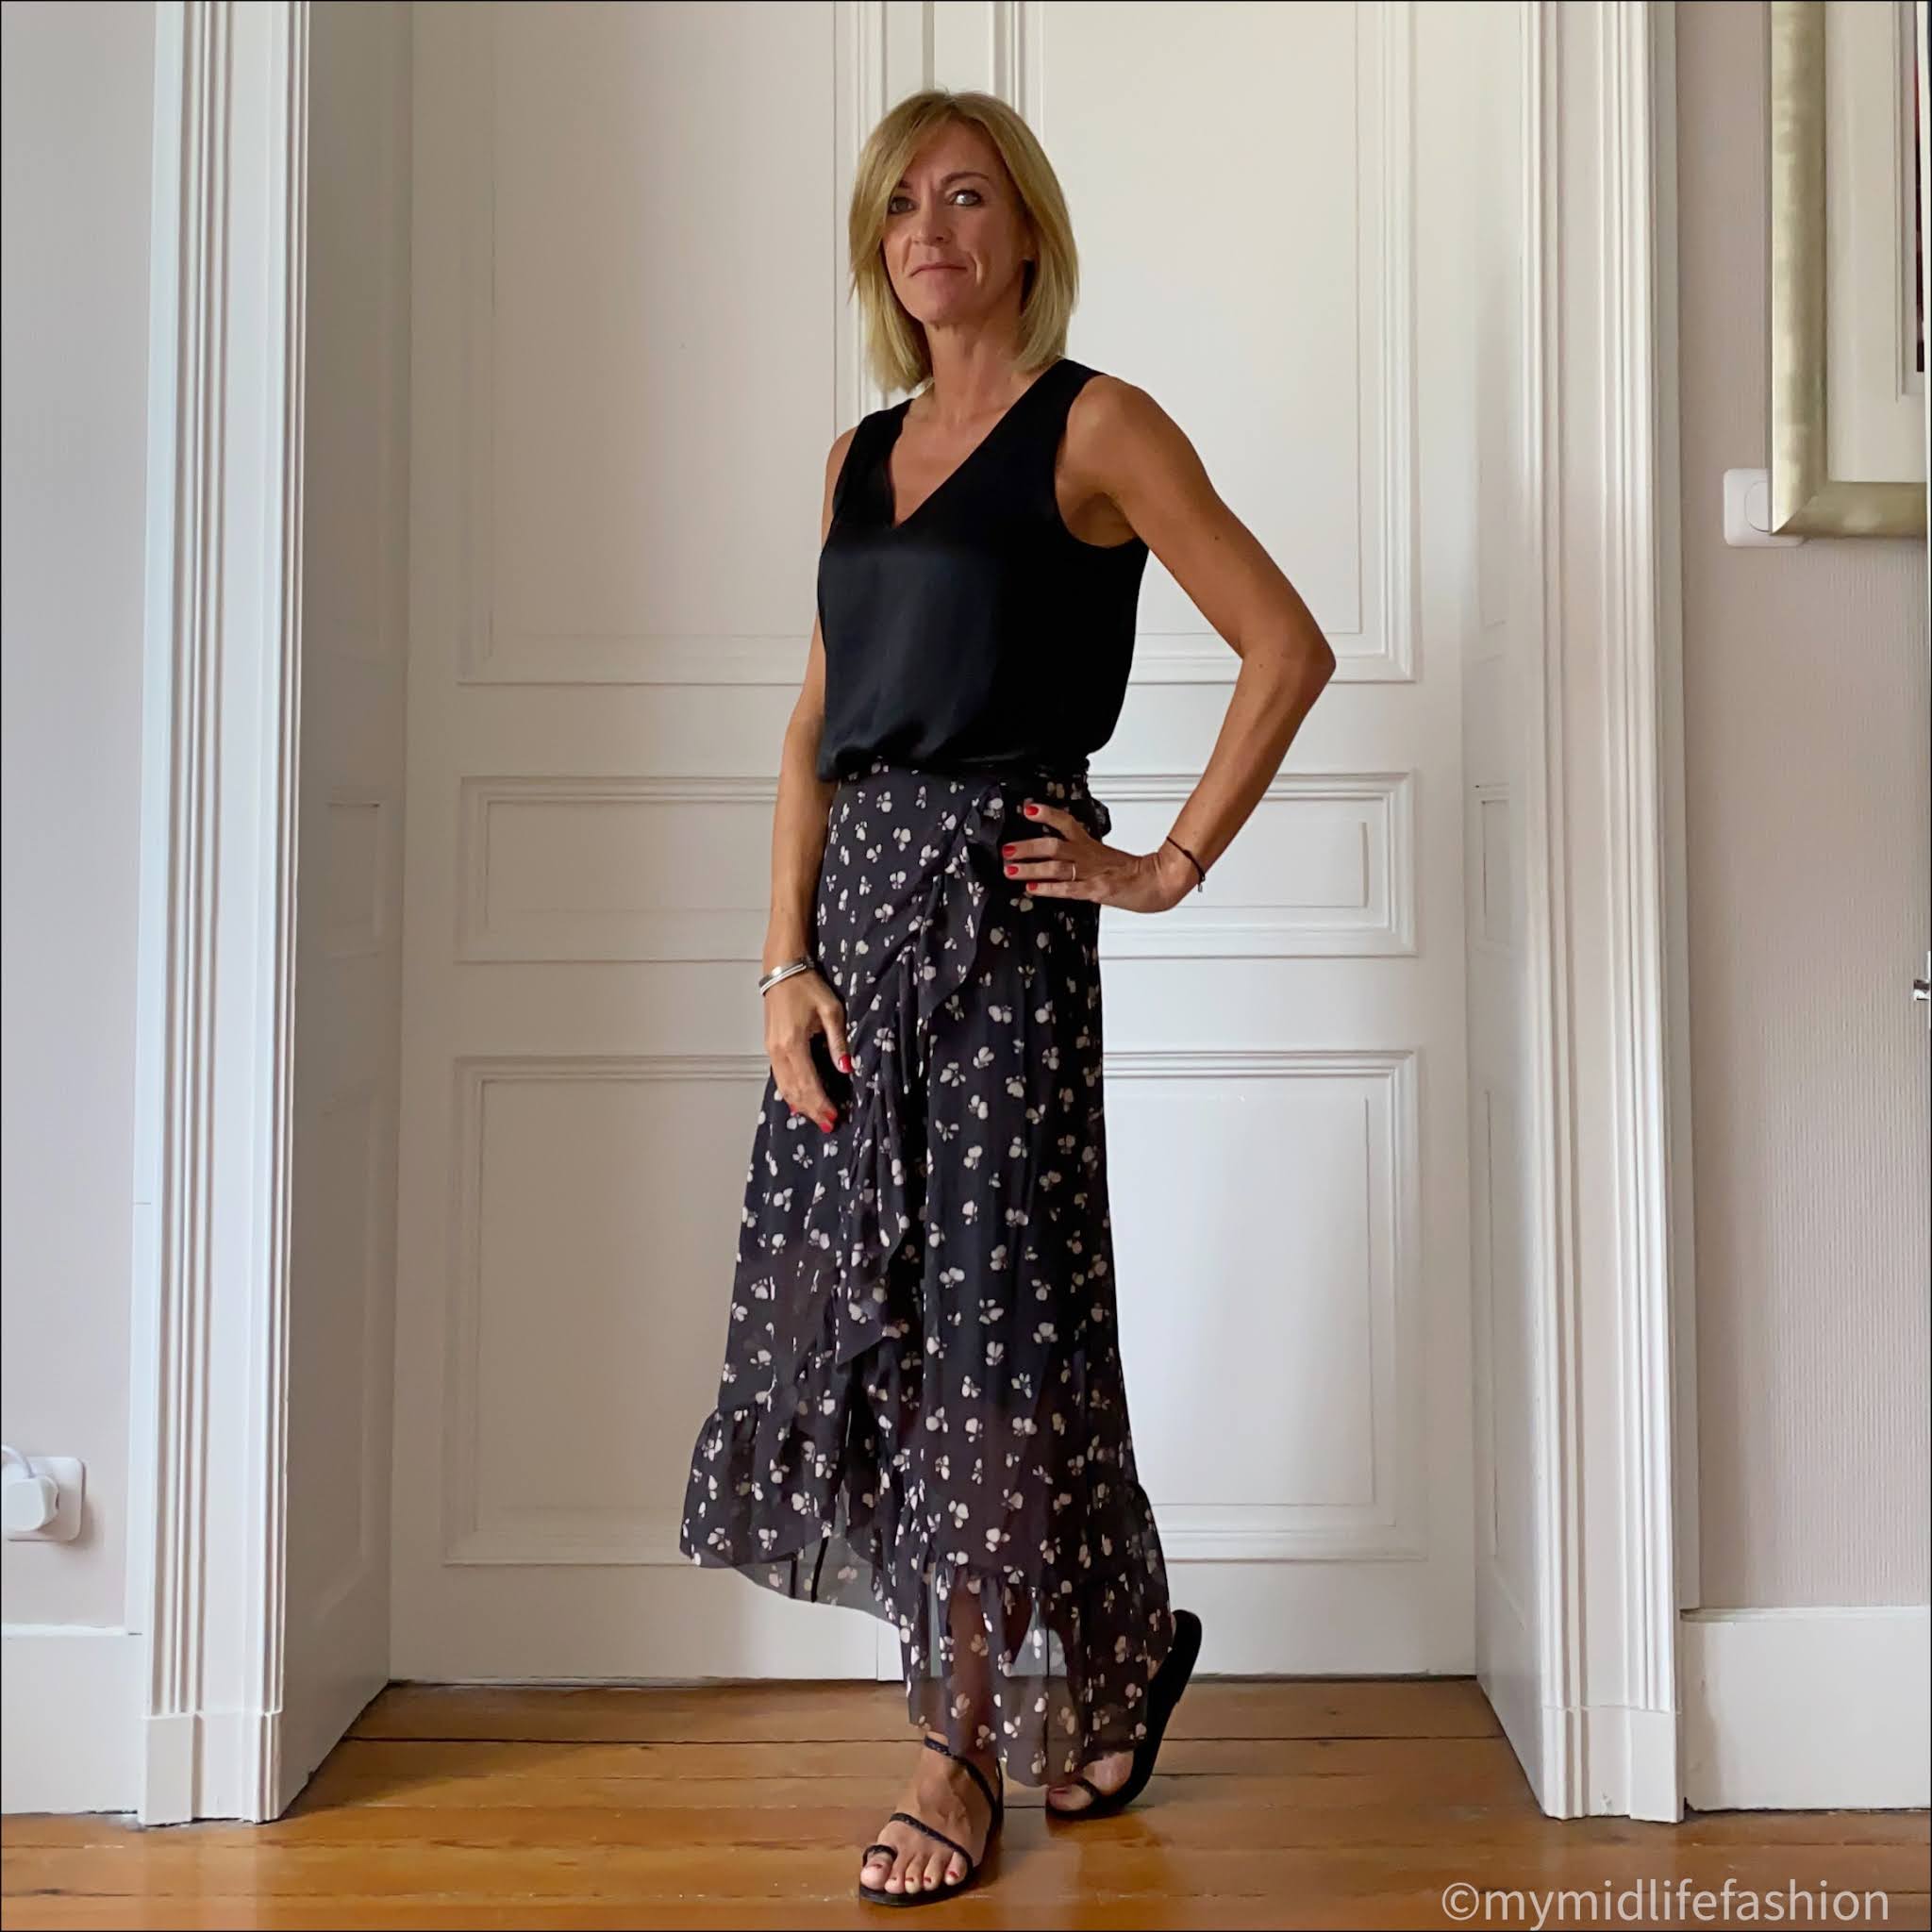 my midlife fashion, Ancient Greek black eleftheria braided leather sandals, ganni ruffle wrap skirt, marks and Spencer silk tank top